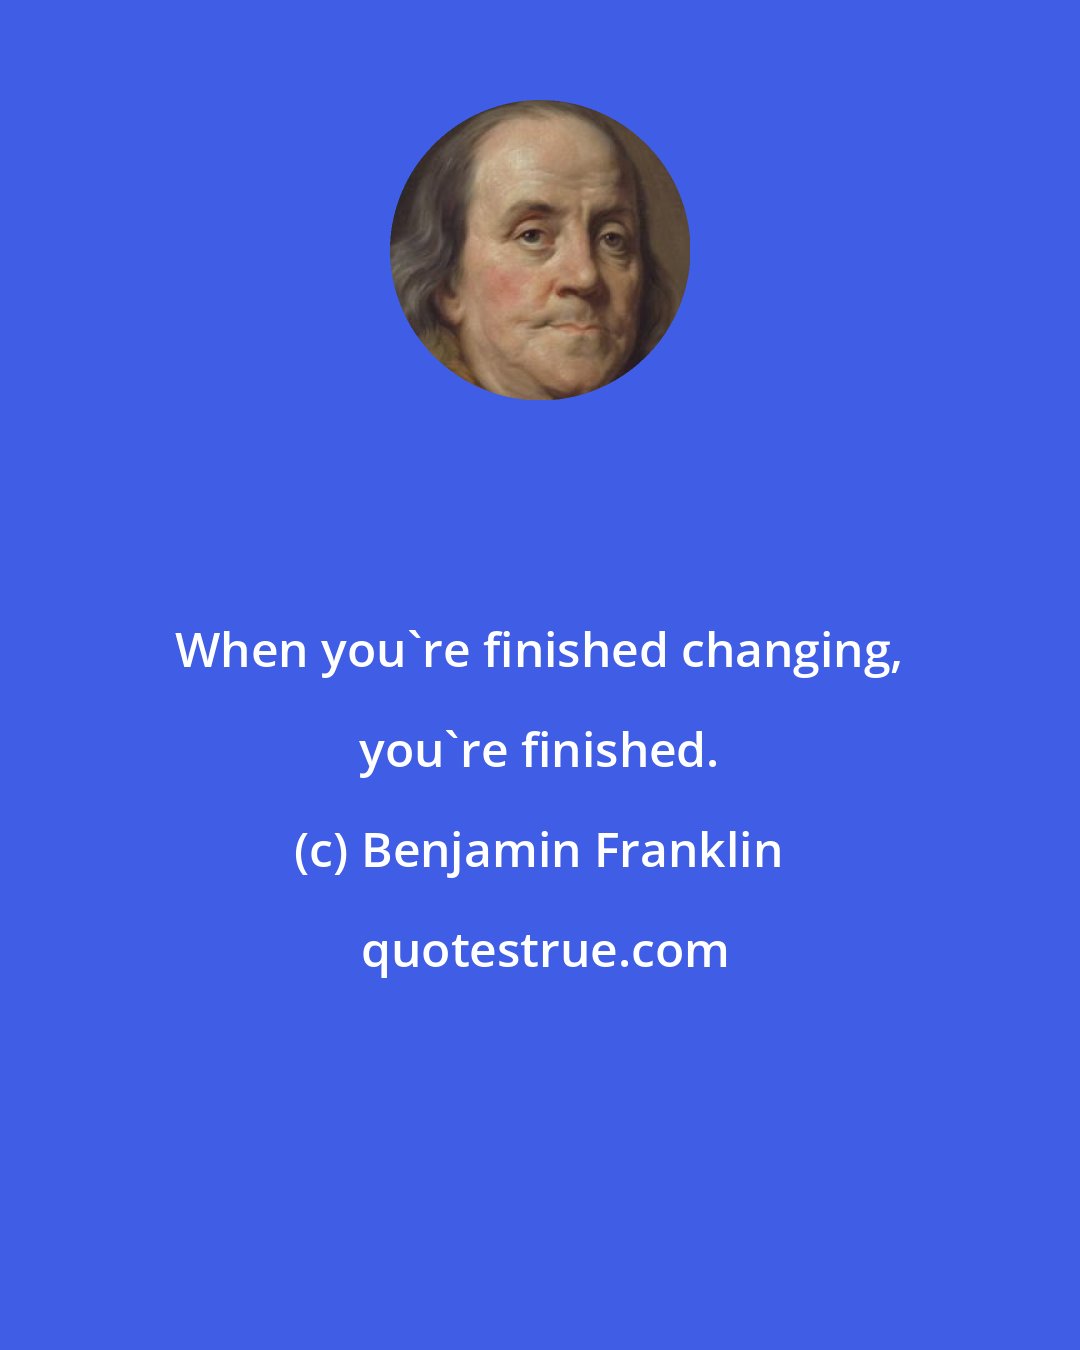 Benjamin Franklin: When you're finished changing, you're finished.